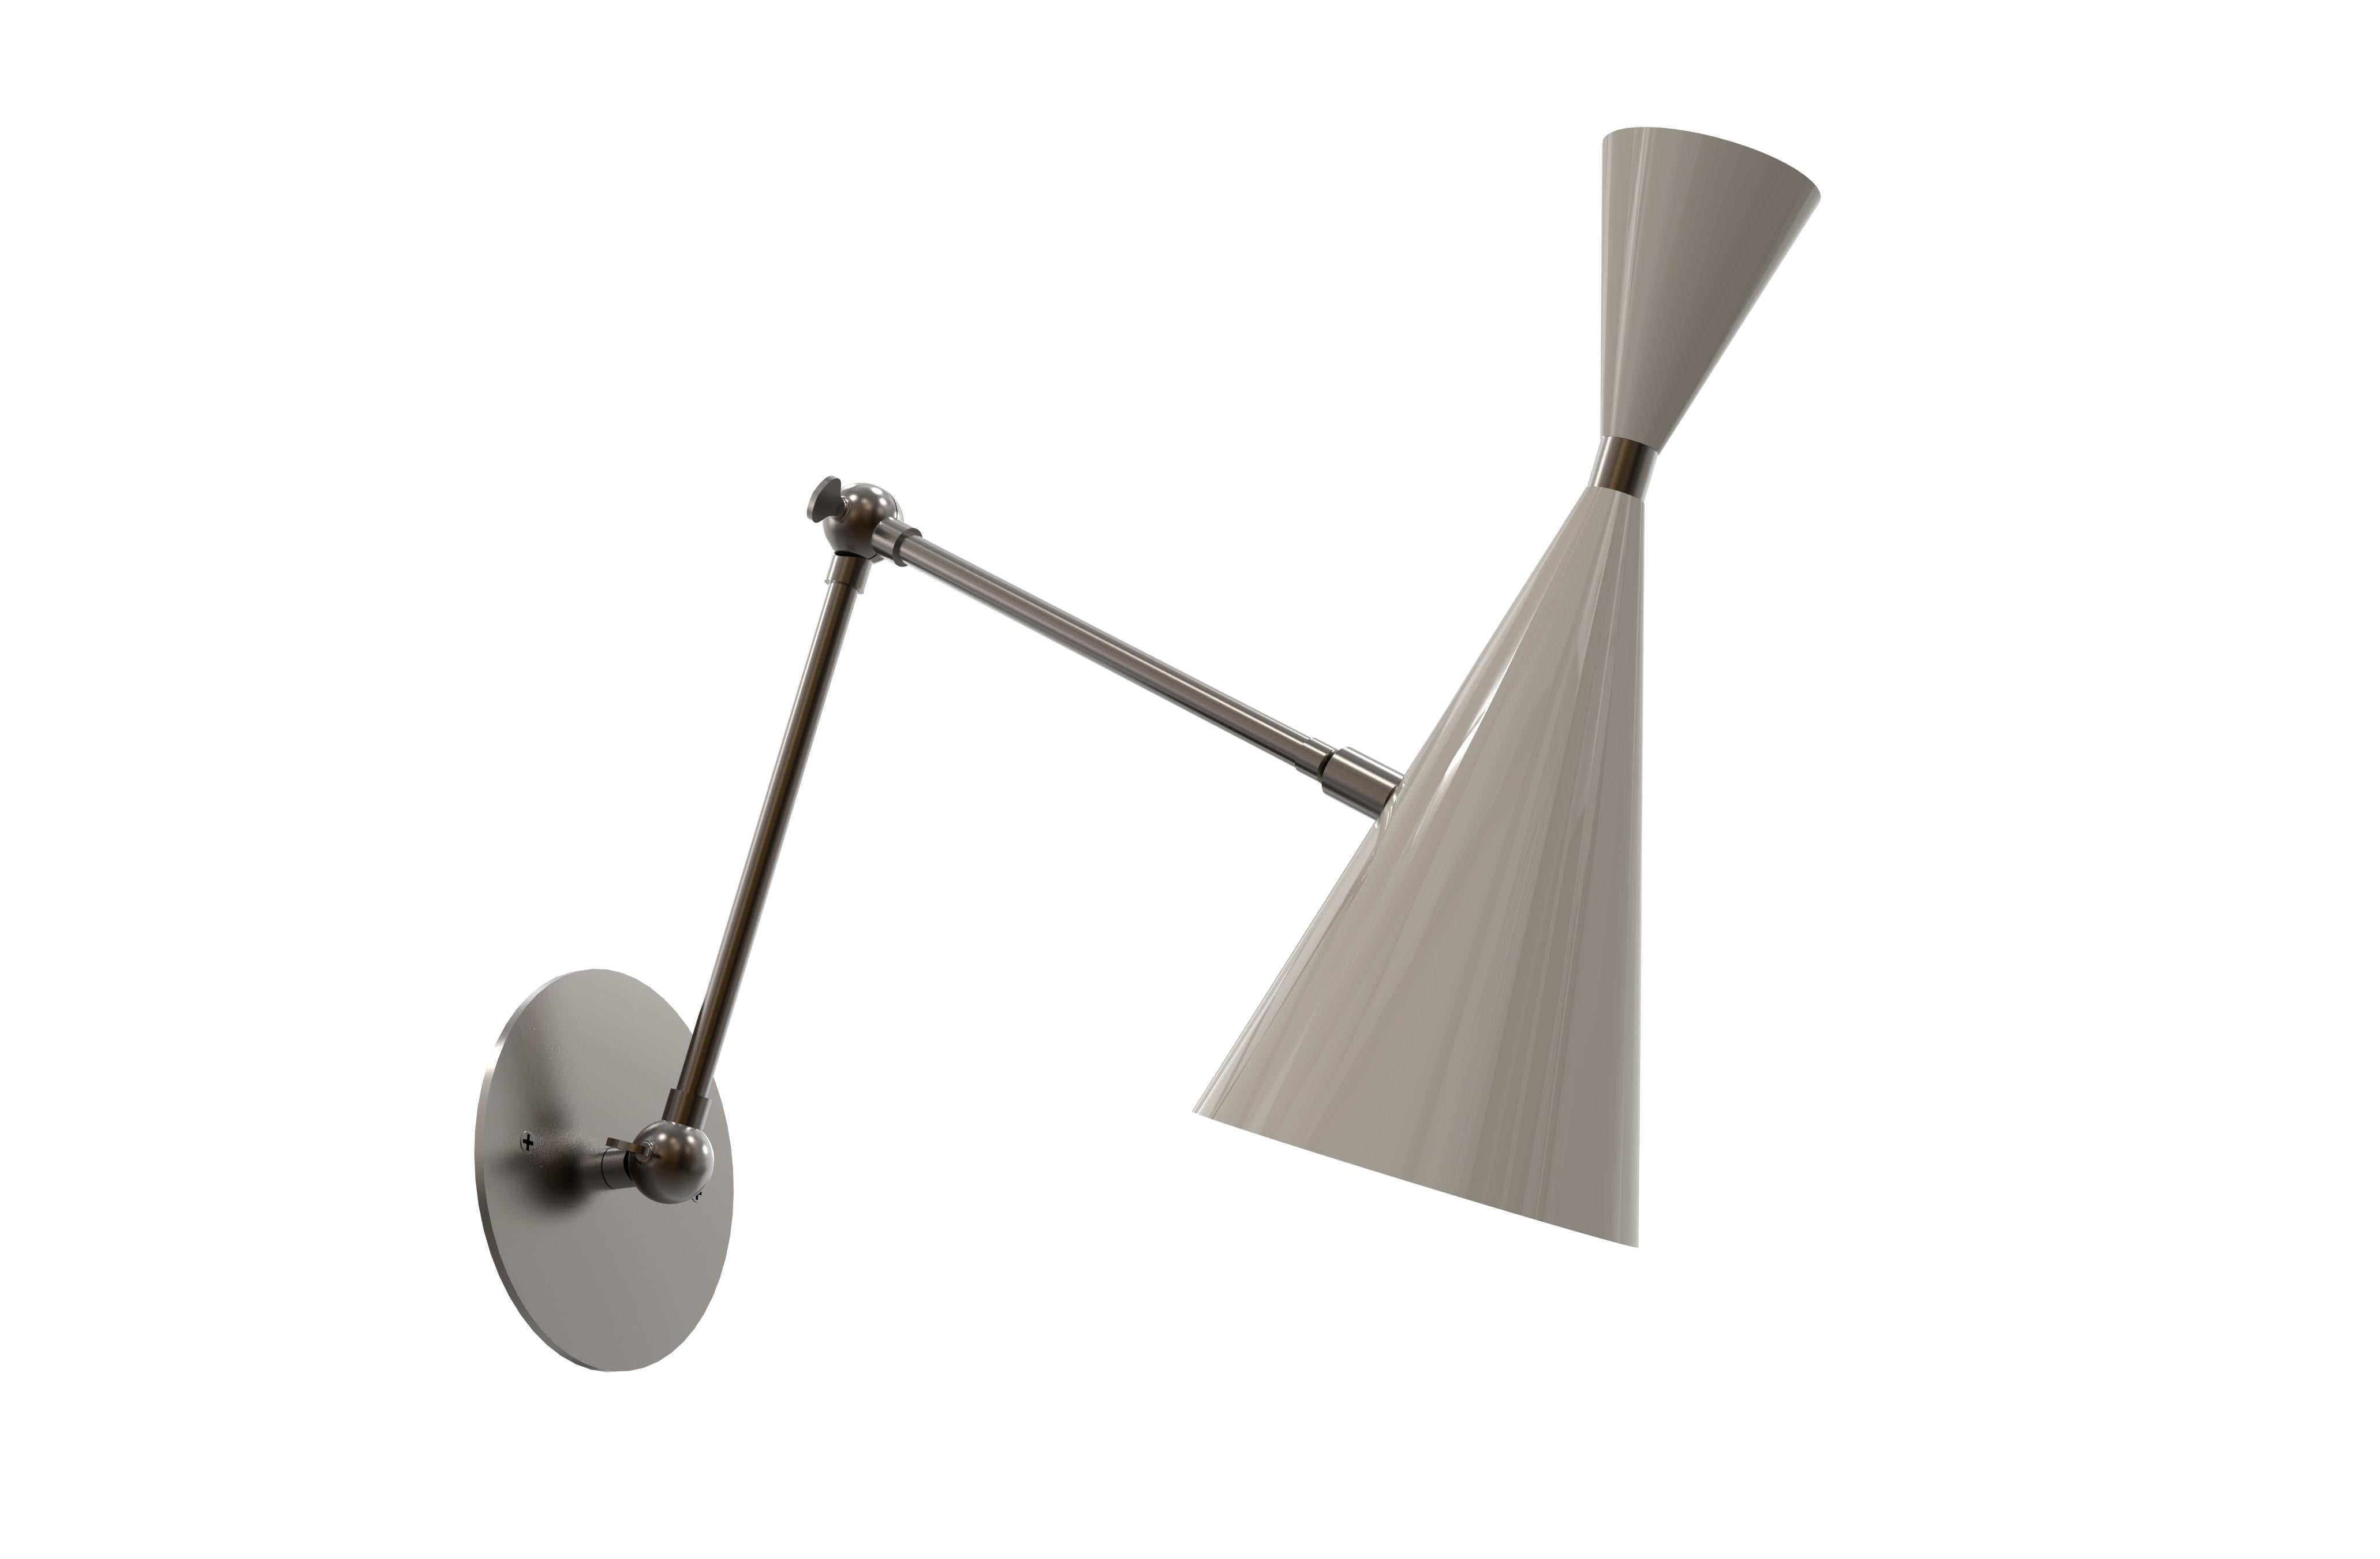 The Monolith sconce or wall-mount reading light with articulating arm and moveable head shown in satin enamel handmade by Blueprint Lighting, 2017. The spun aluminium cones are a vintage 1950s Italian design. Pivoting arm allows for height